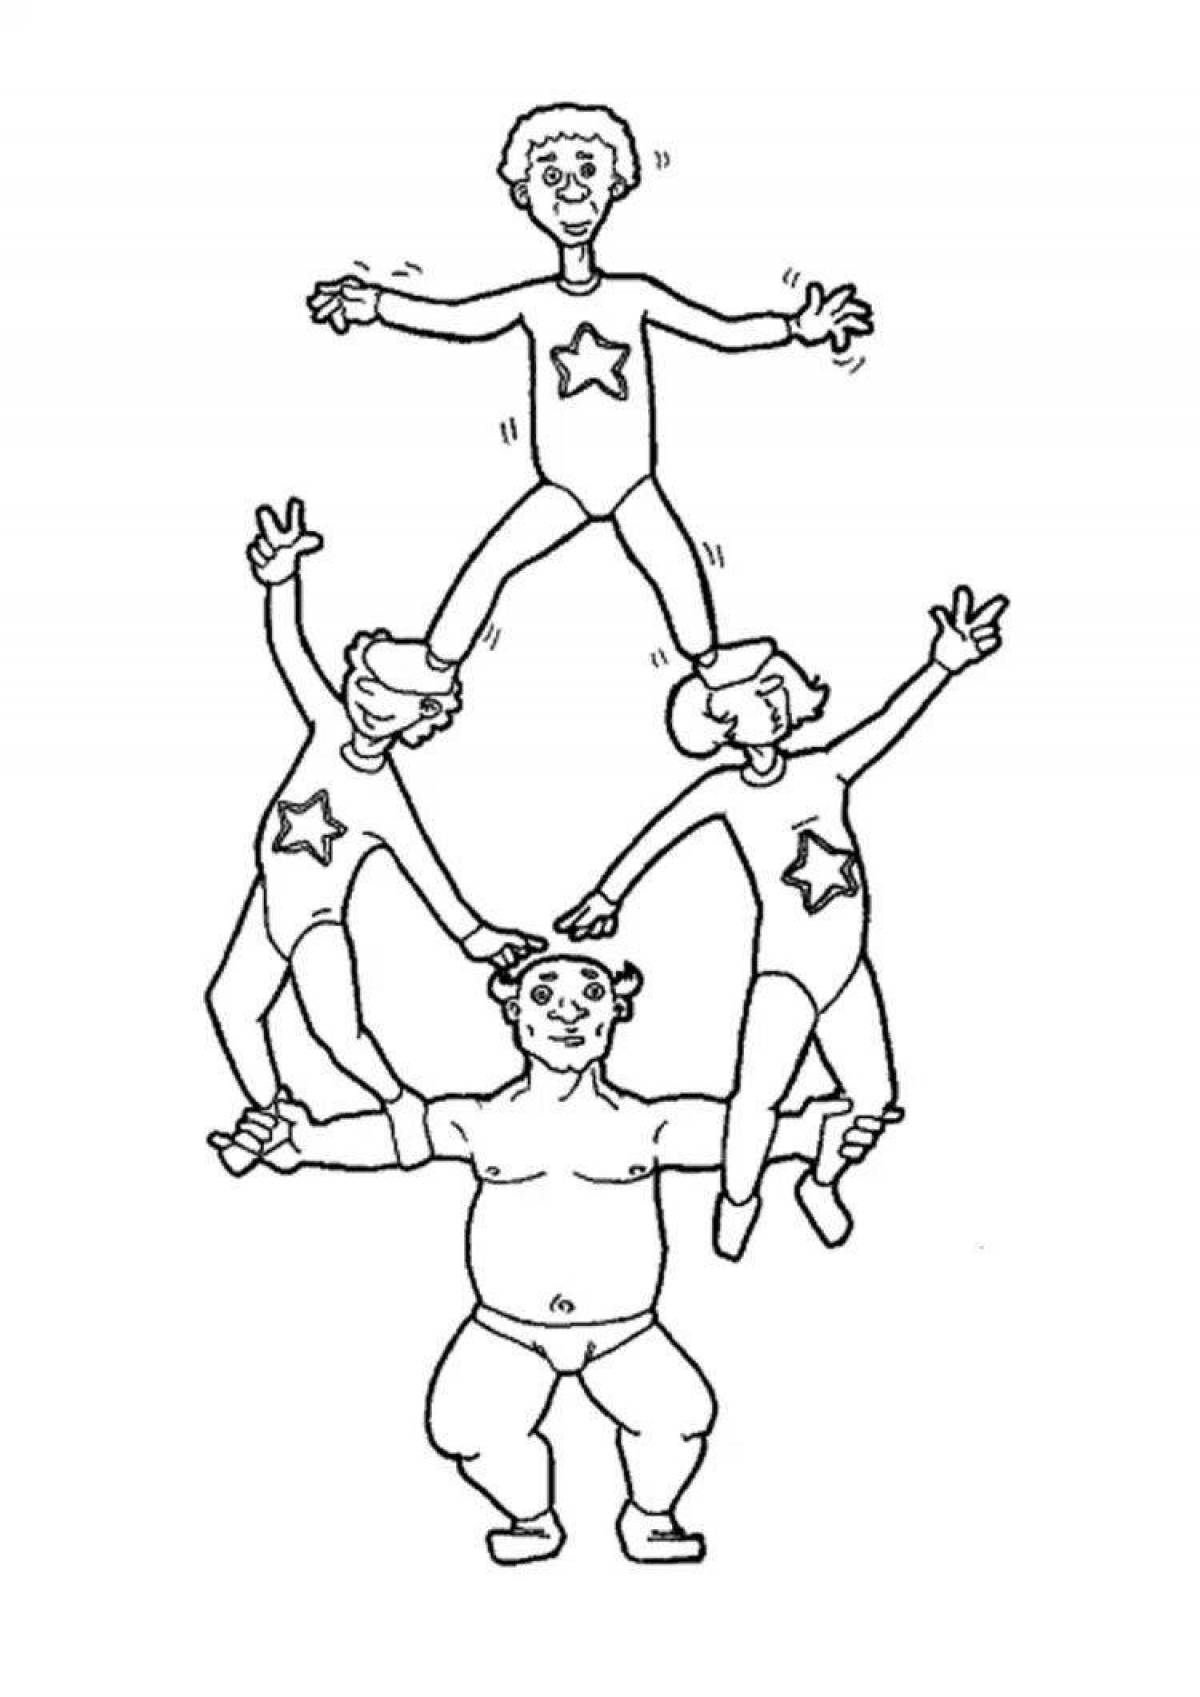 Colorful acrobat coloring page